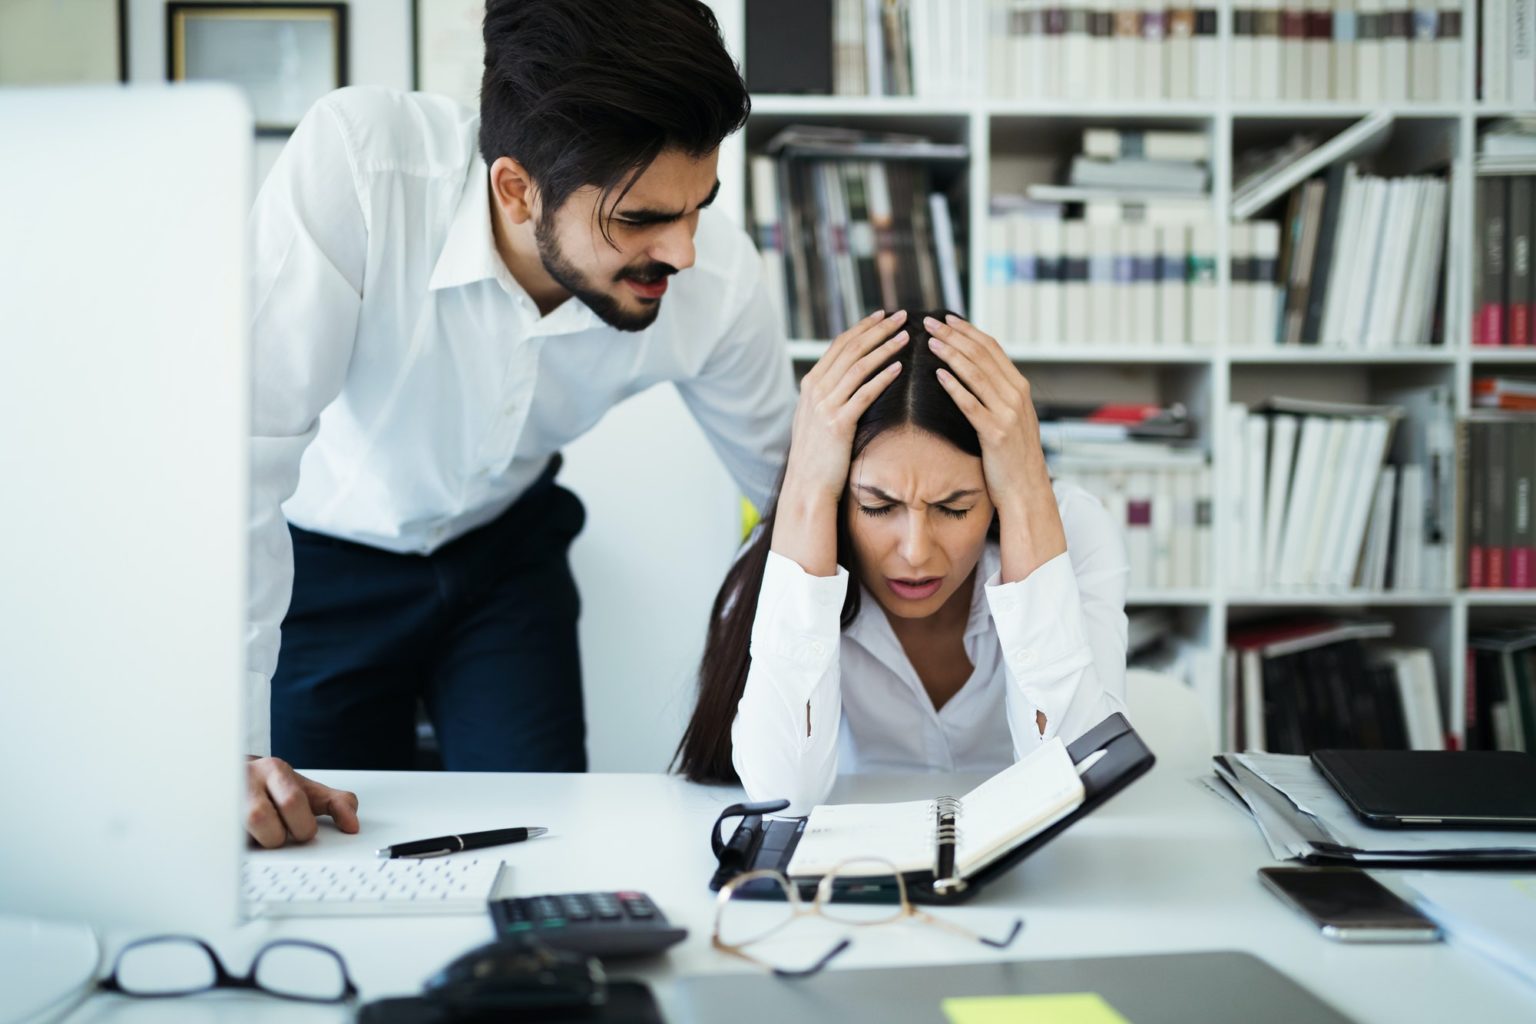 Angry irritated boss reprimanding employee afraid to be fired, bad work